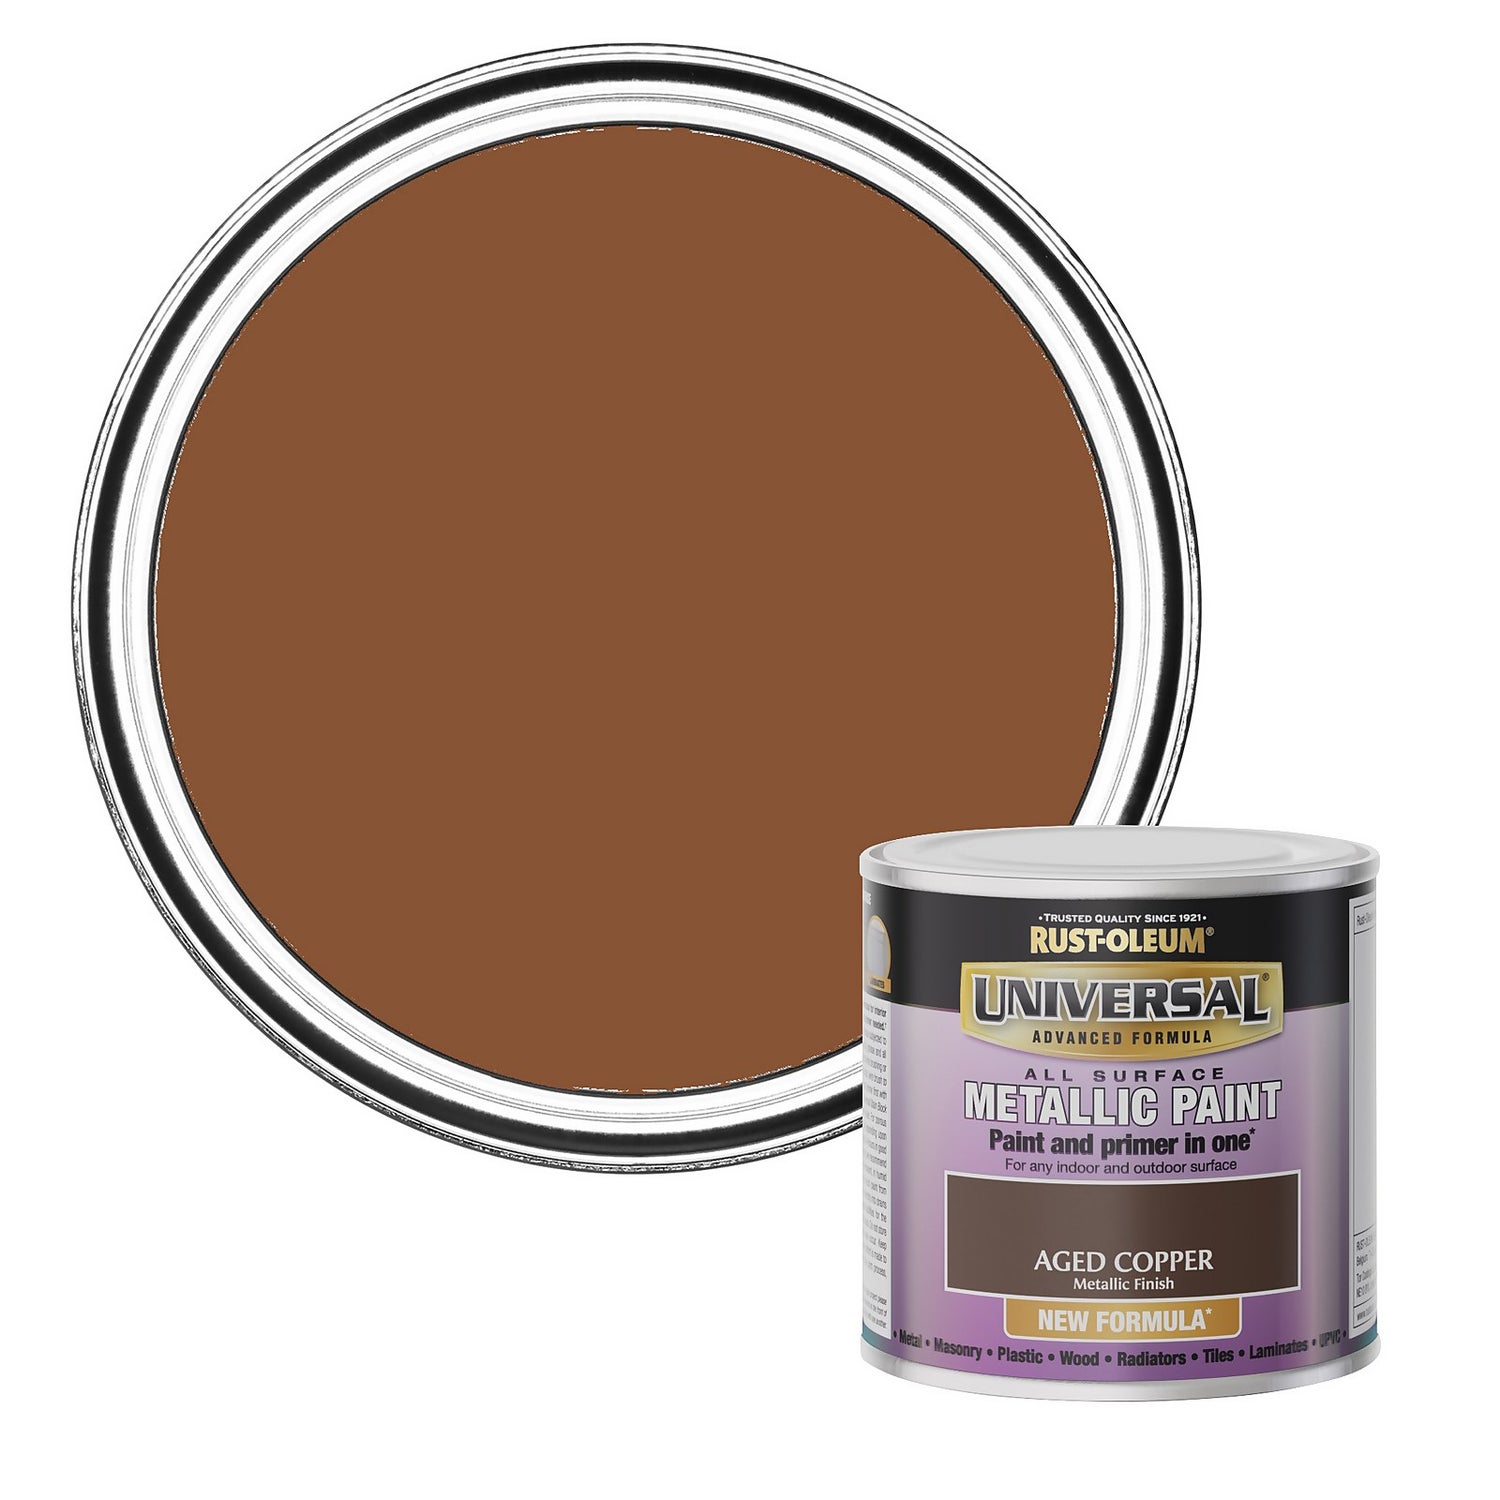 Brushed metals effect paint for any surface, for industry and hand